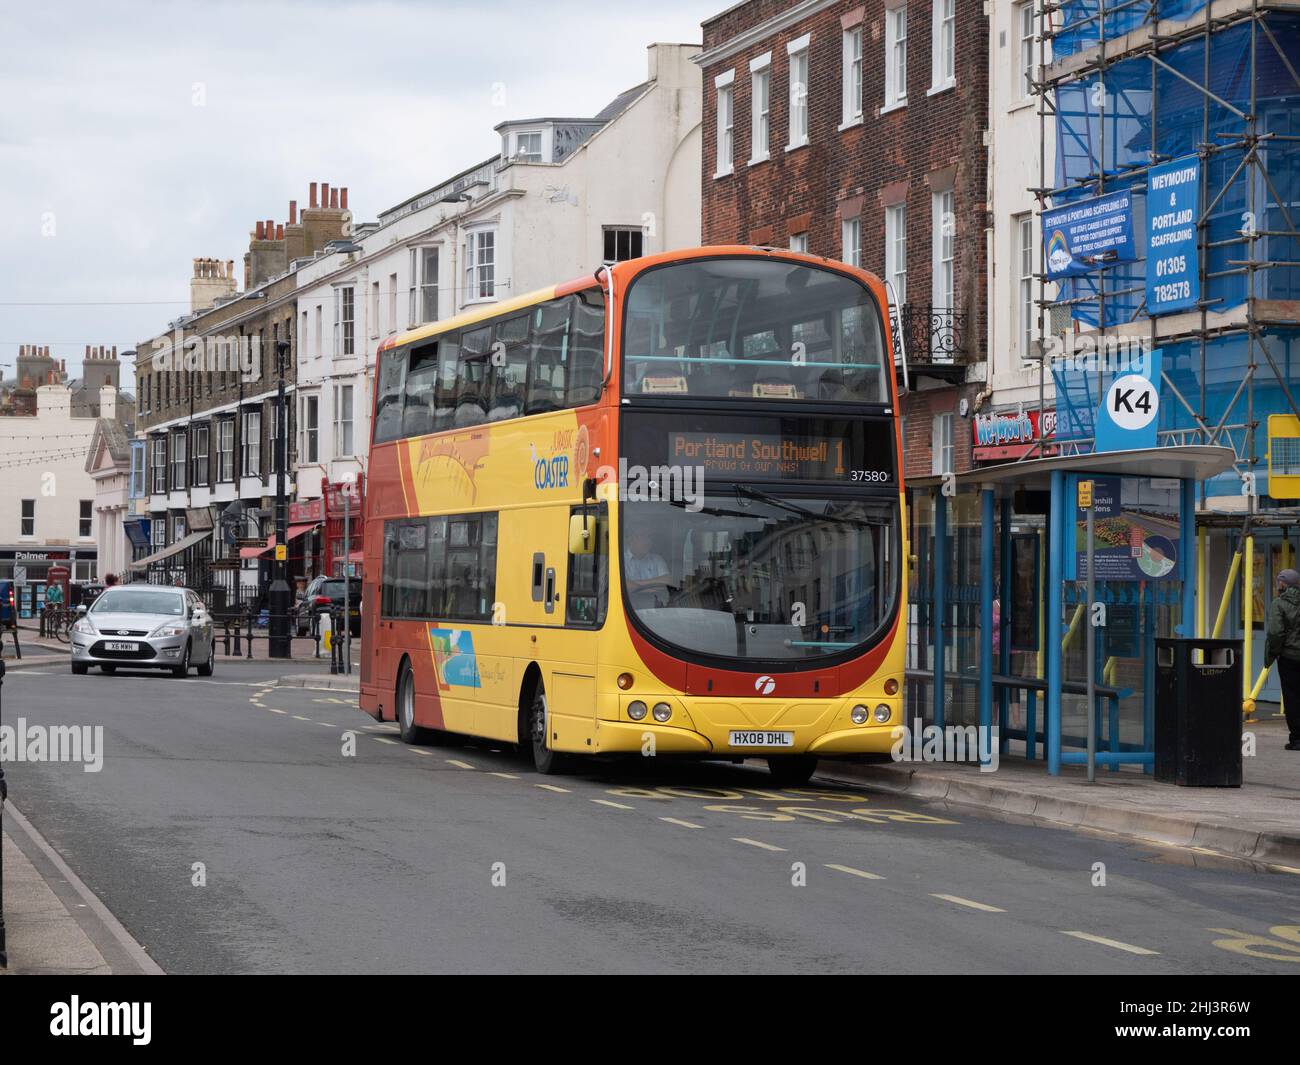 First Wessex Jurassic Coaster bus on the Esplanade at Weymouth Stock Photo